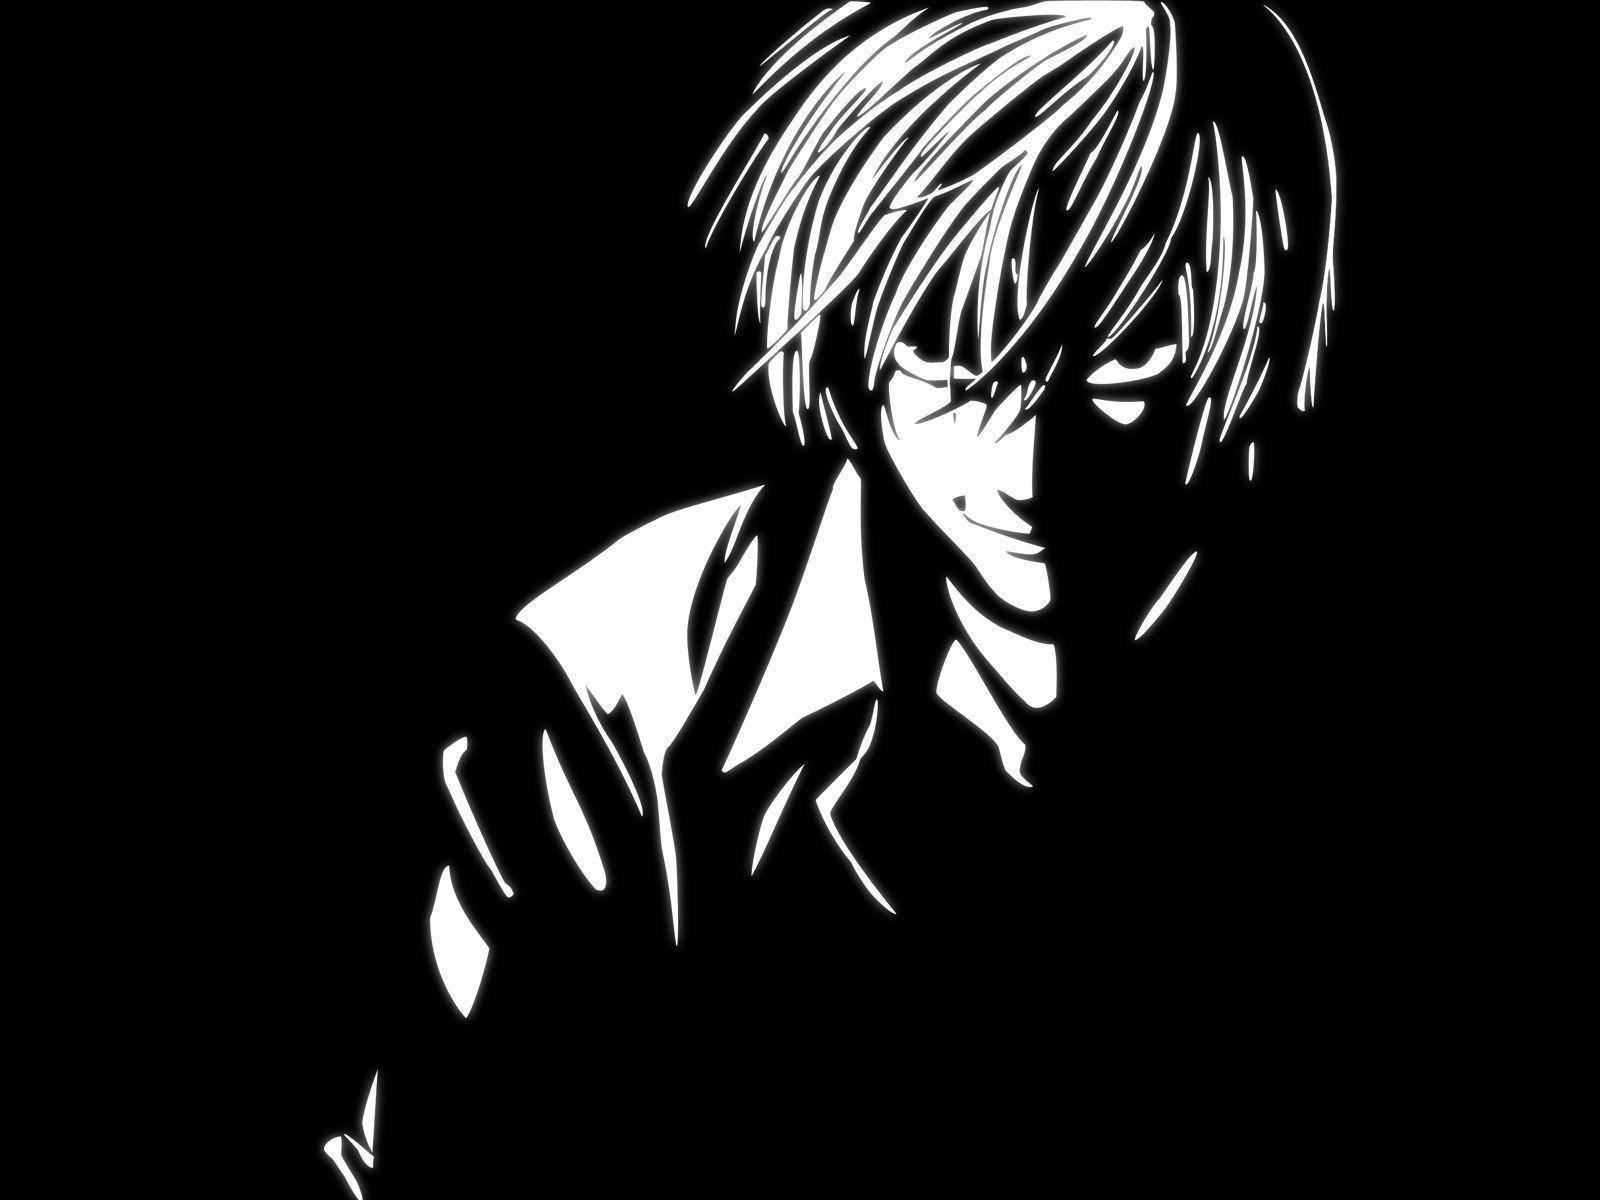 Top 999+ Death Note Wallpaper Full HD, 4K✅Free to Use